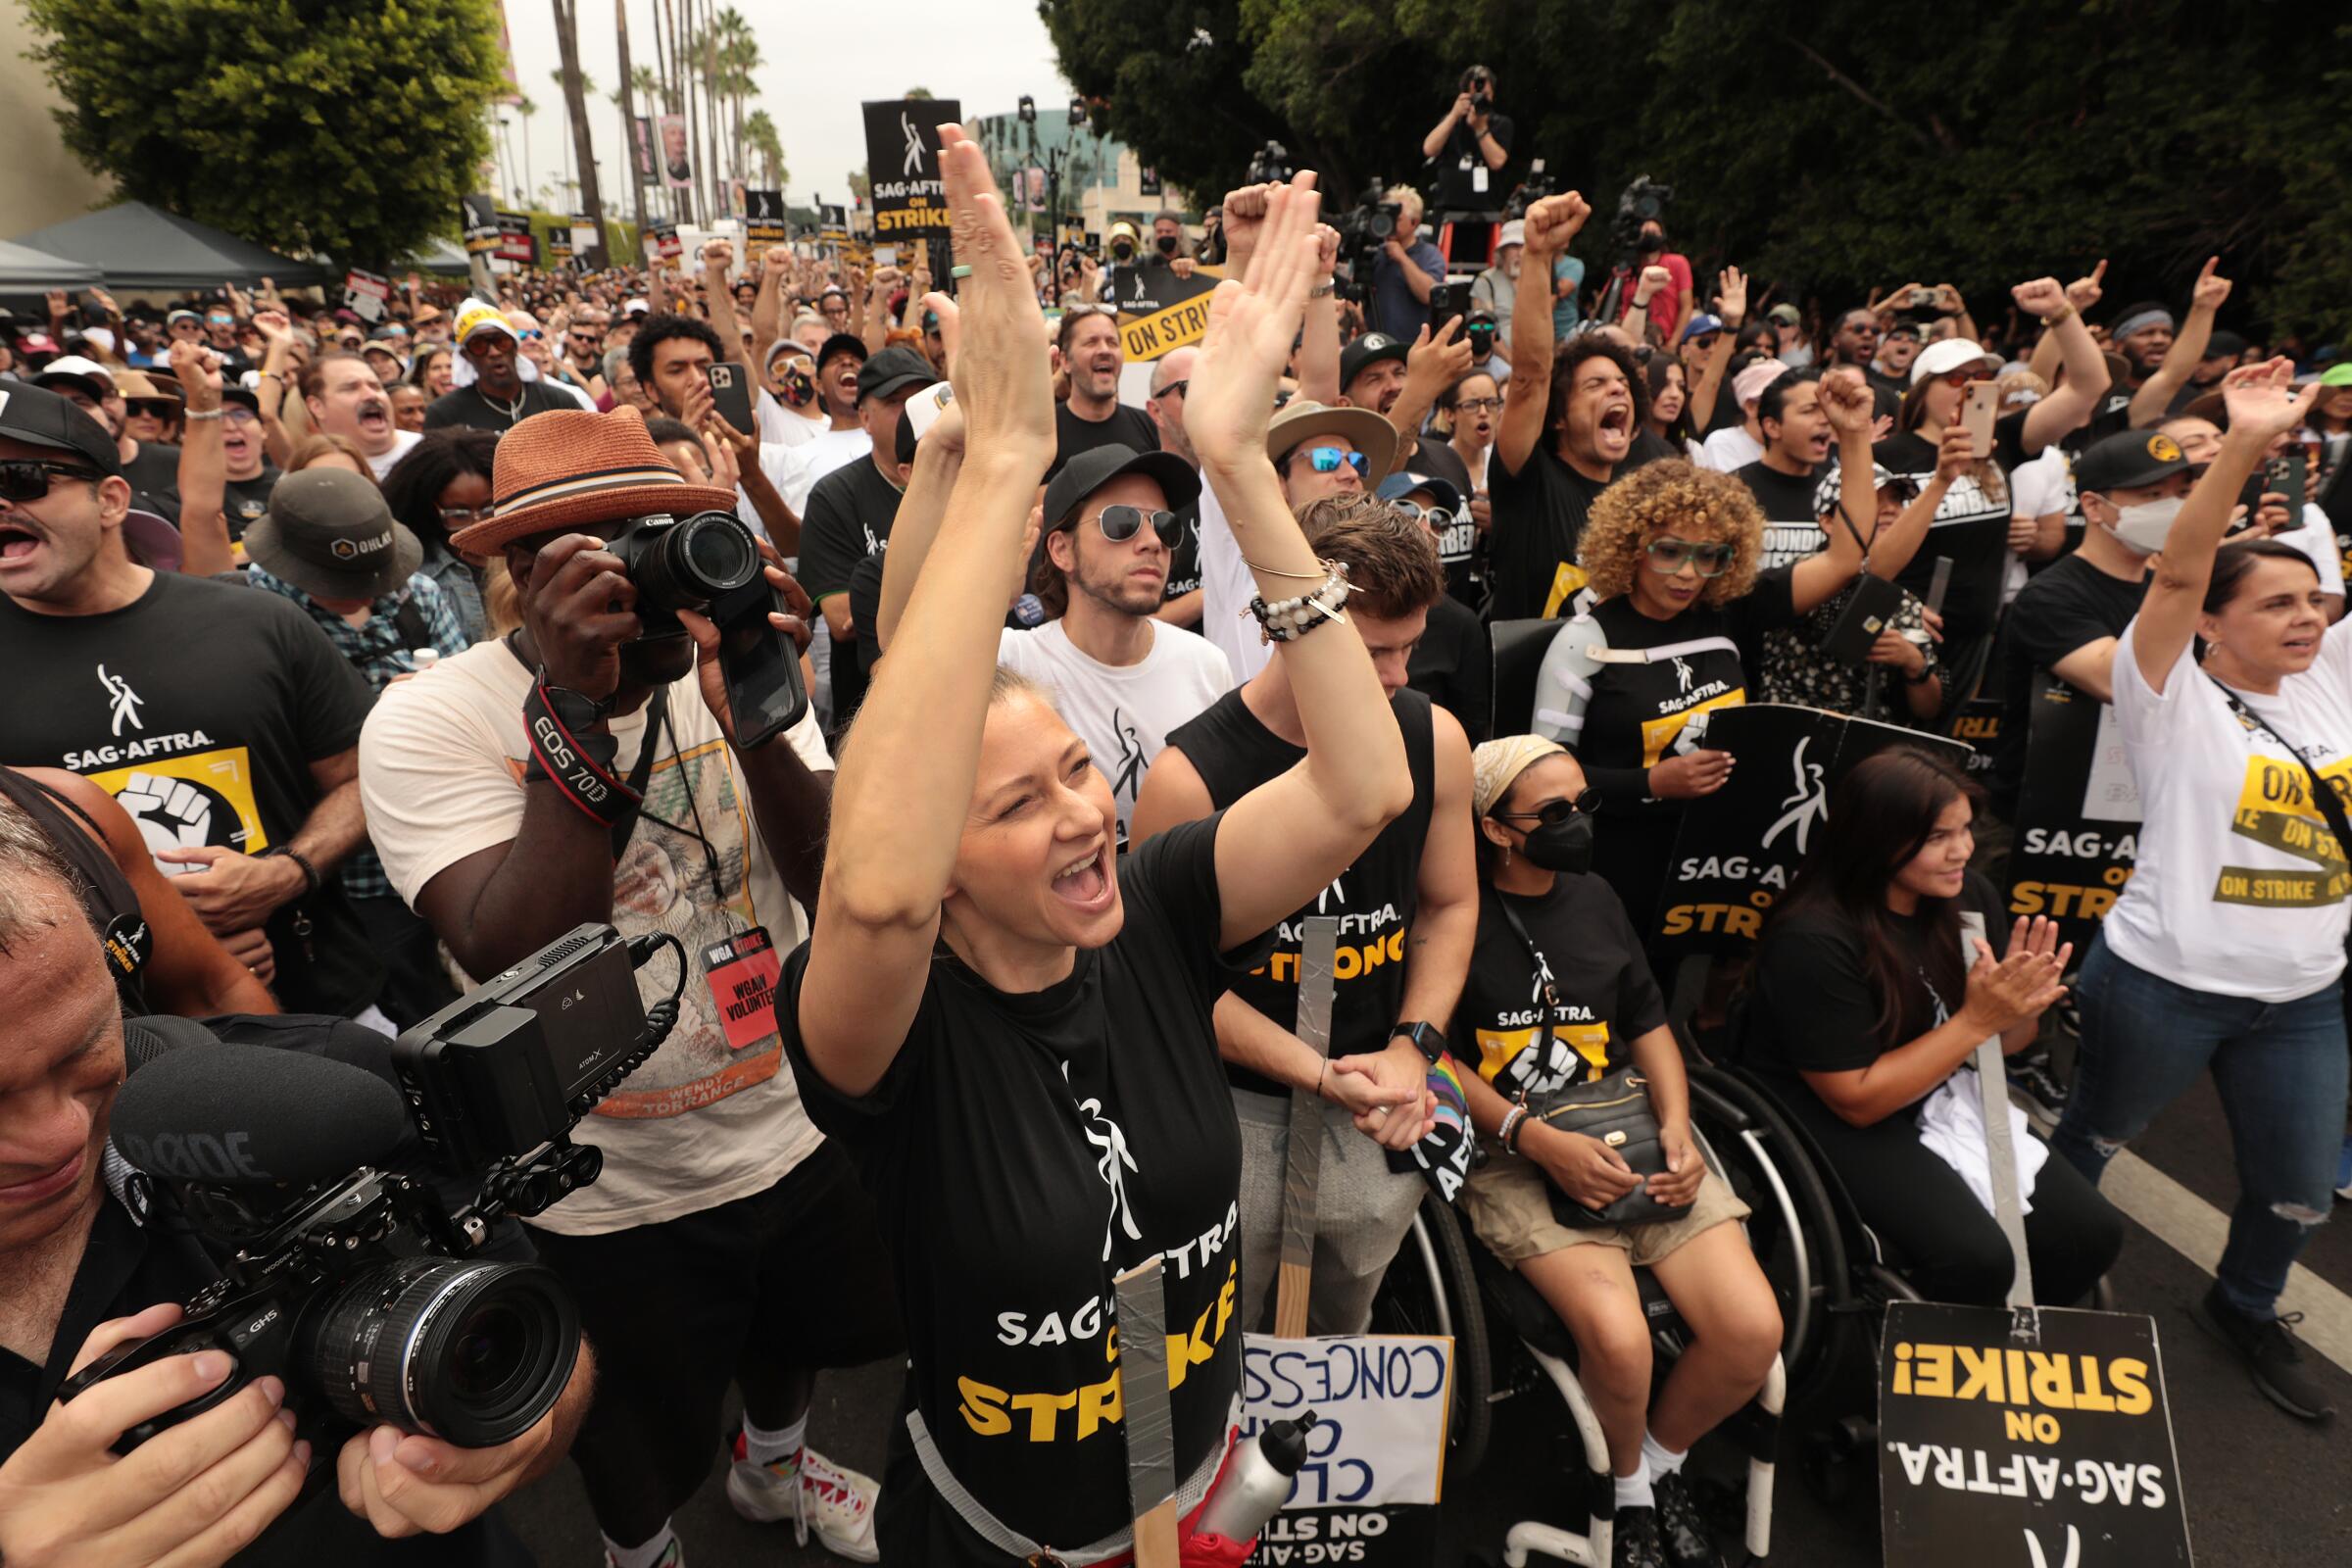 SAG-AFTRA members take to the picket line outside Netflix in Los Angeles.